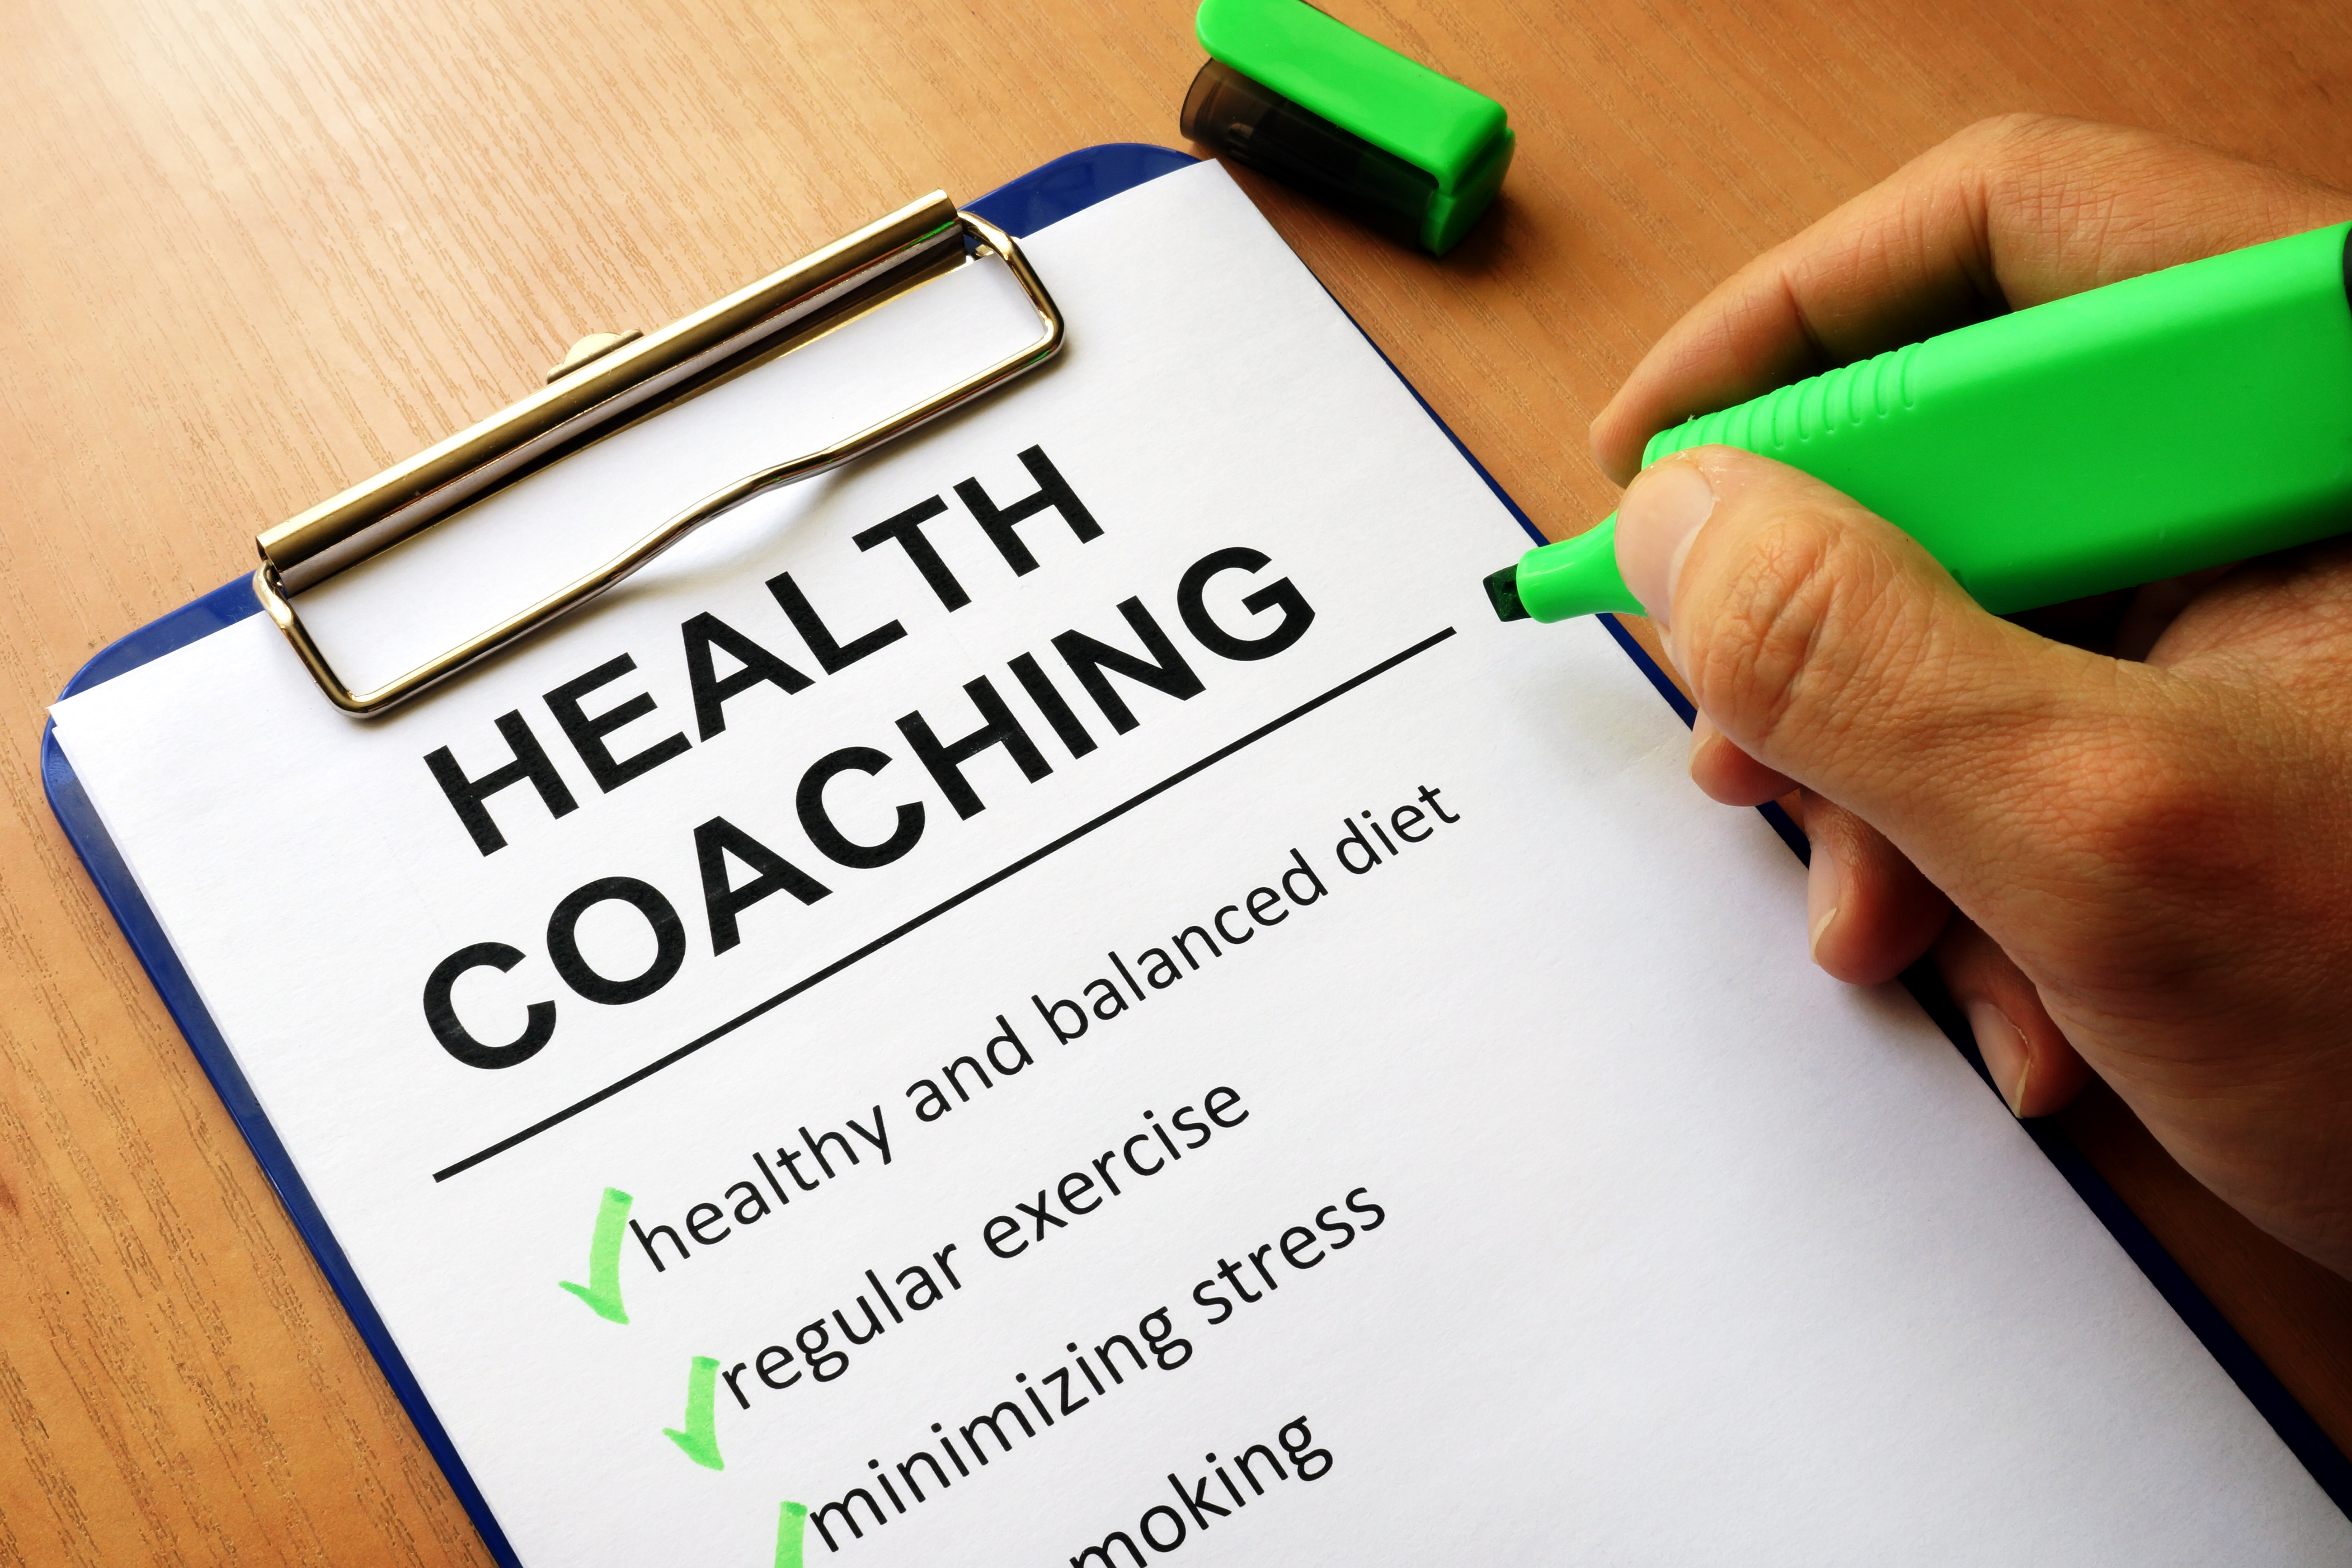 Client Agreement and Consent - Health Coach - image shutterstock_657955471-1 on https://docuhealth.com